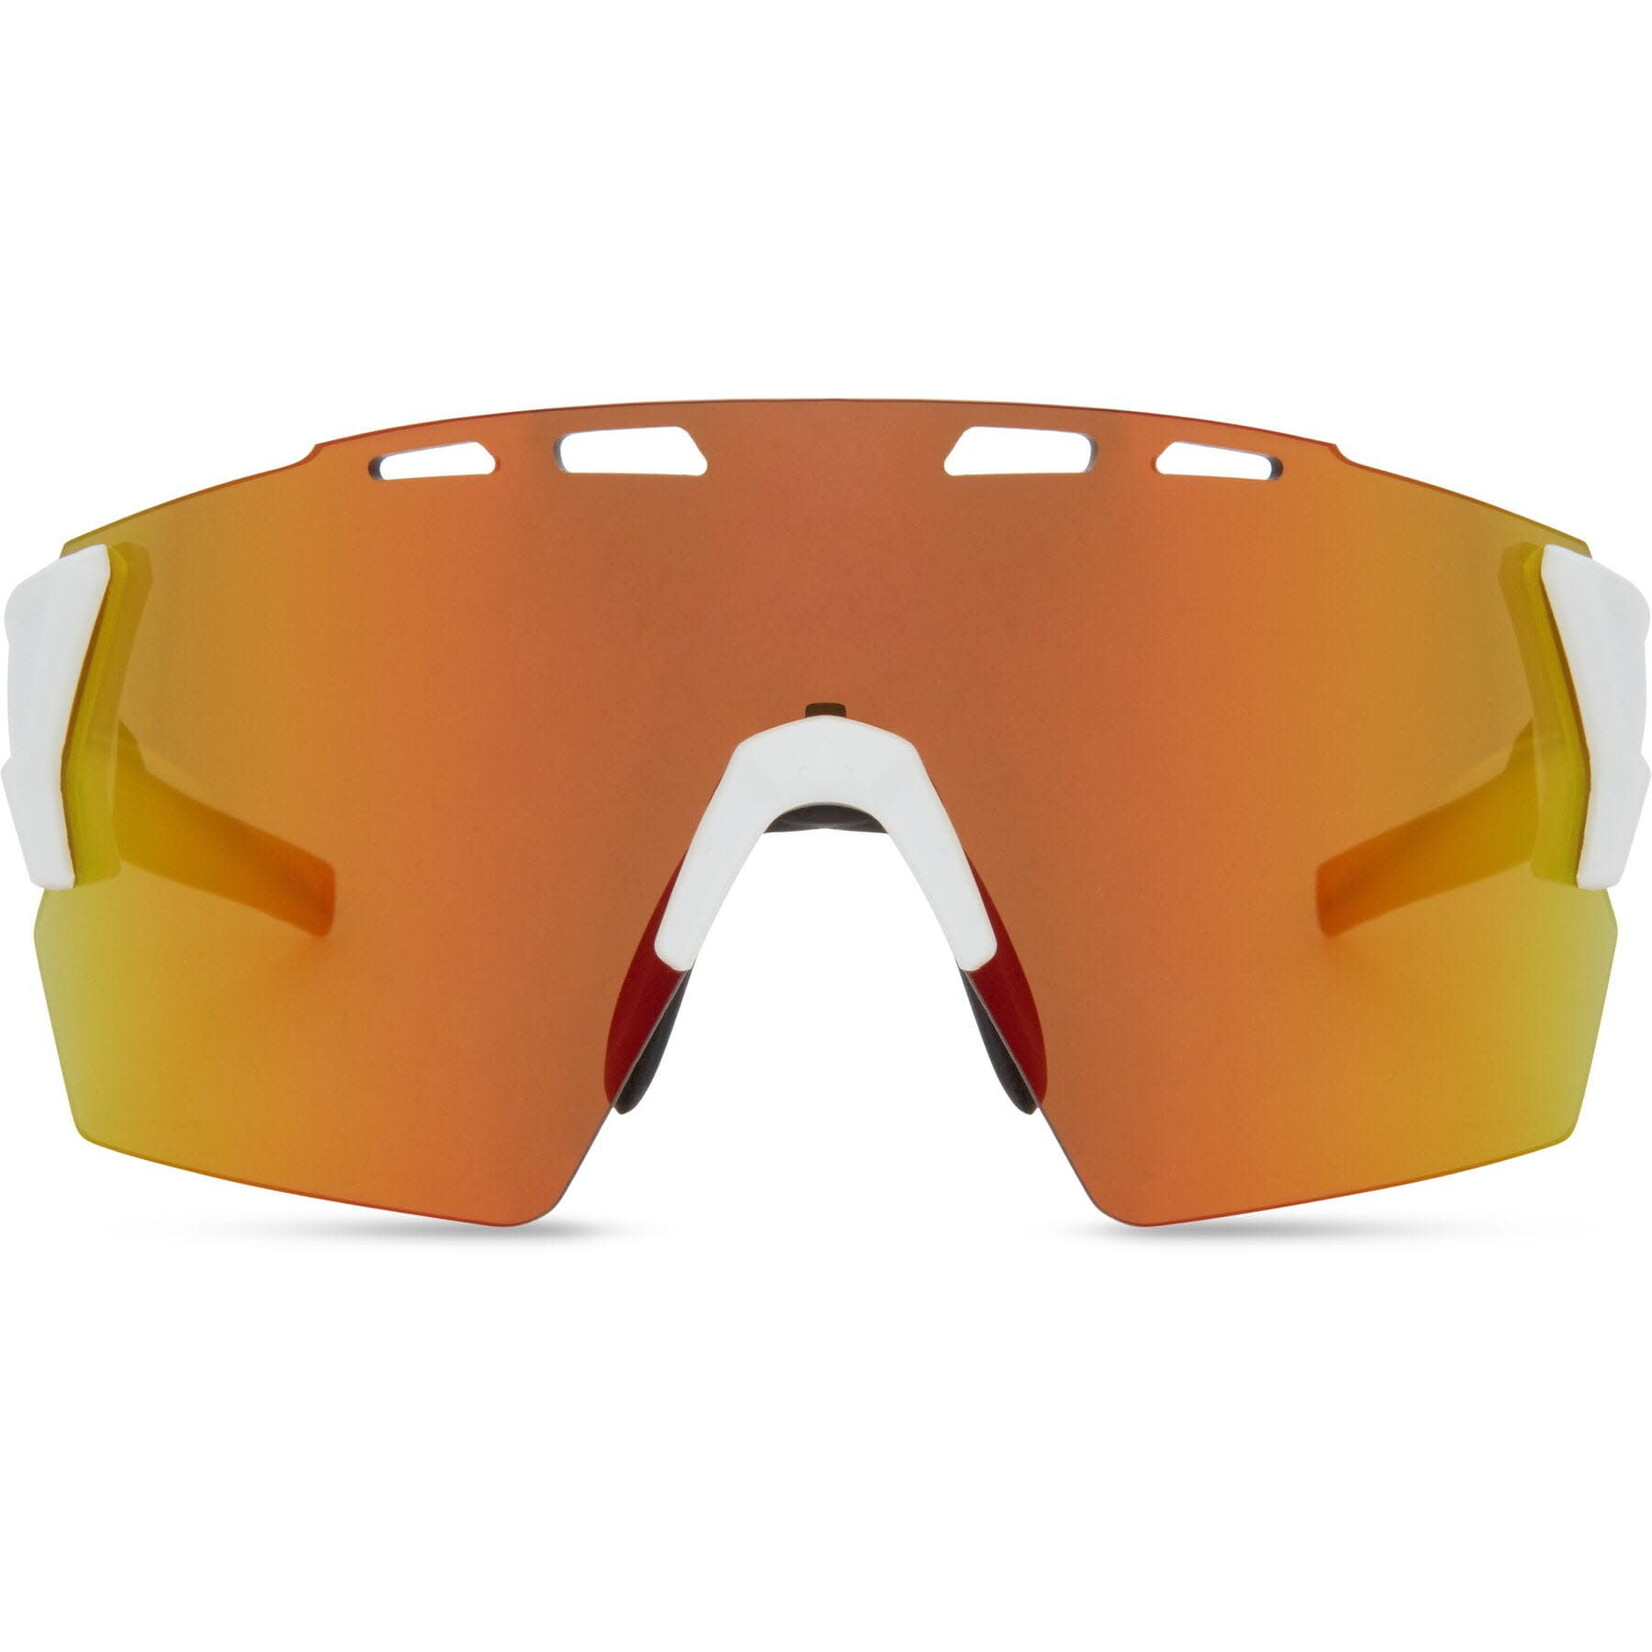 Madison Madison Stealth II Sunglasses - 3 pack - gloss white / blue mirror / amber and clear lens